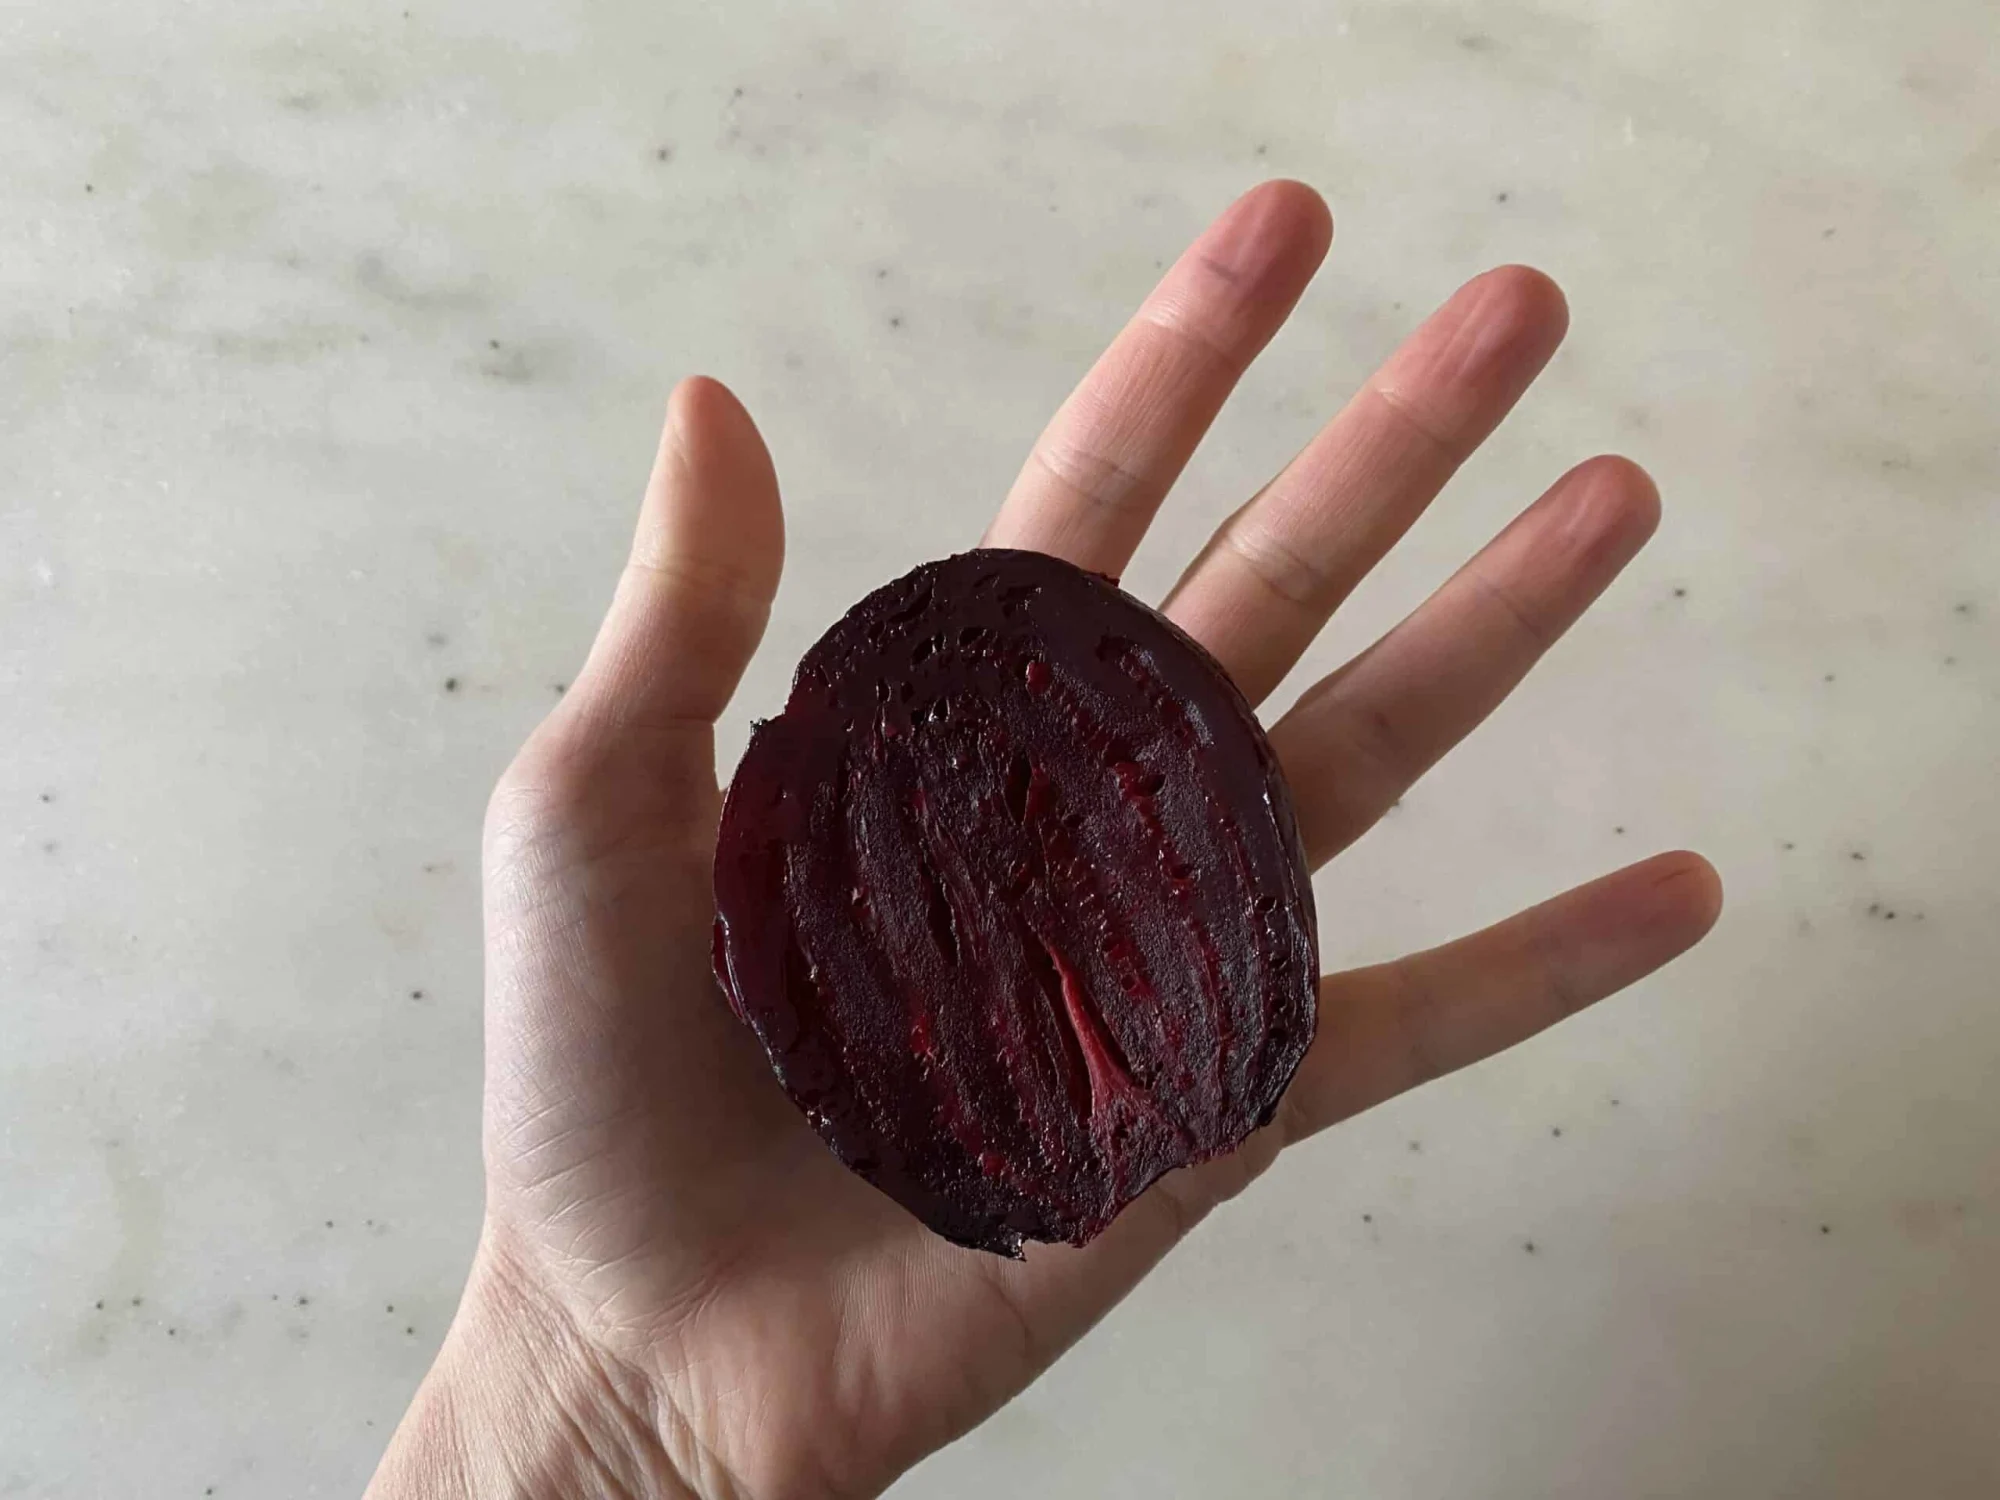 a cooked beet cut in half for babies starting solids